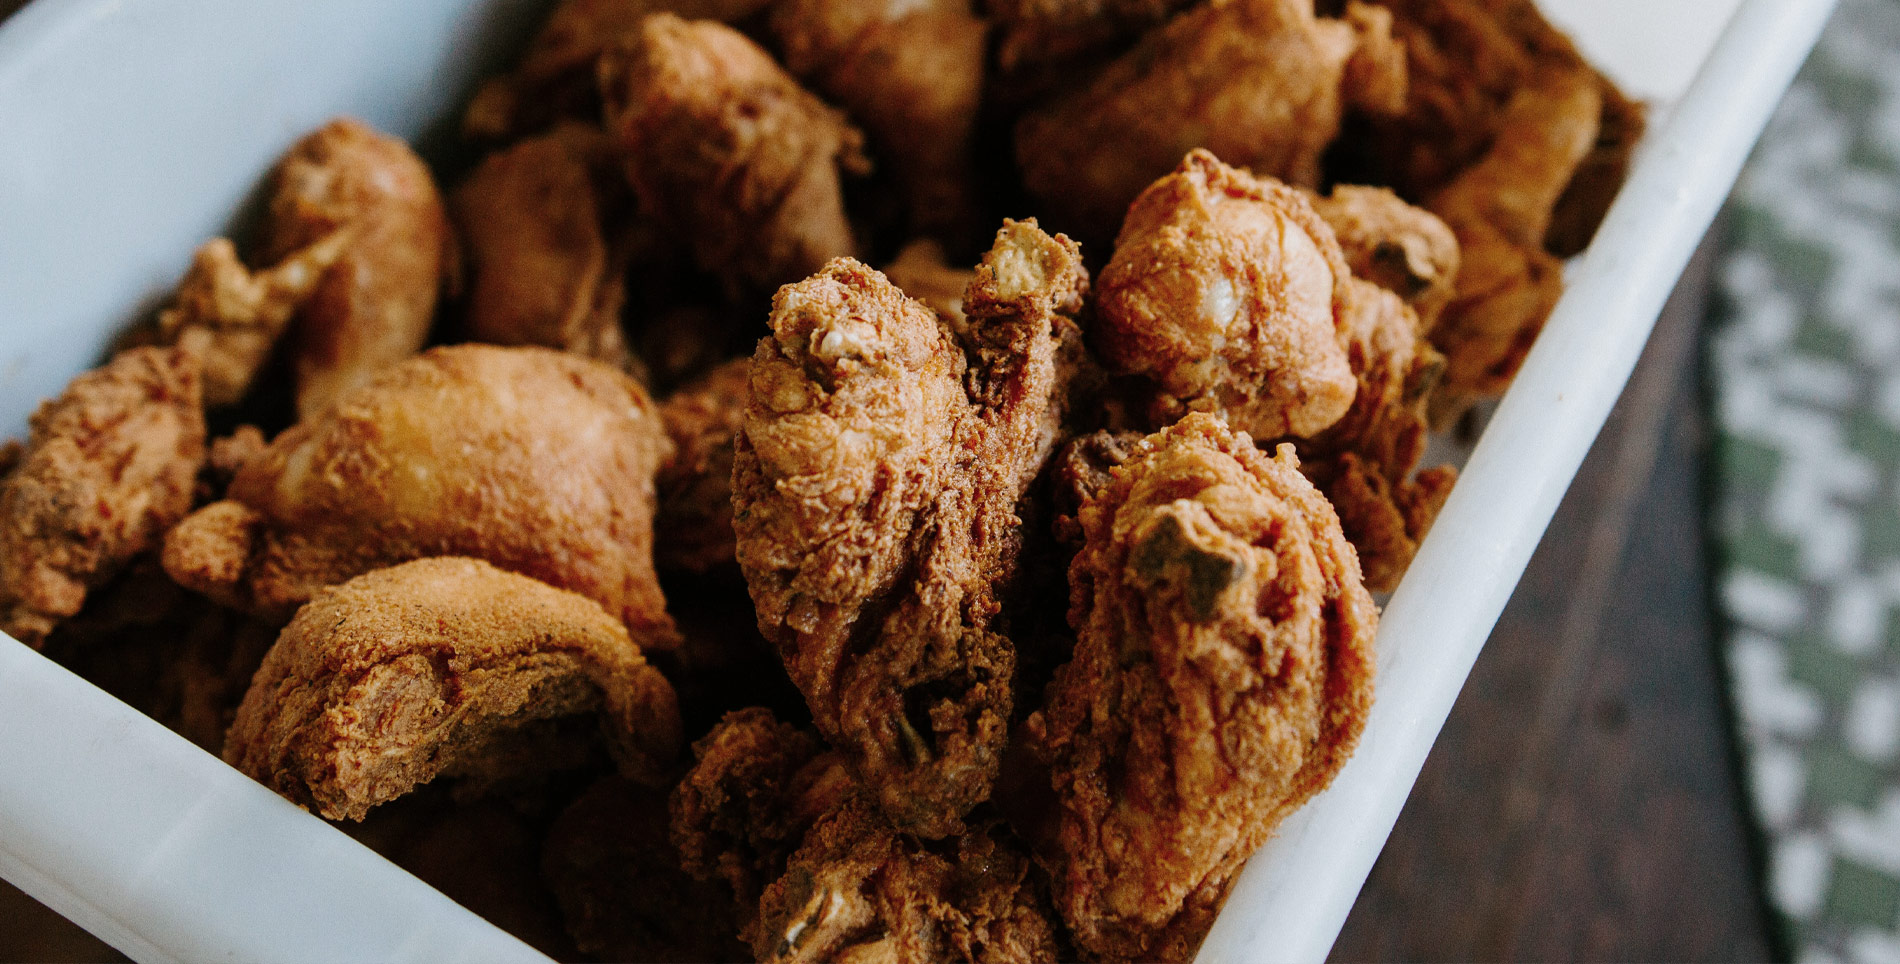 Fried Chicken Isn’t a Punchline—It’s Part of the Black American Story